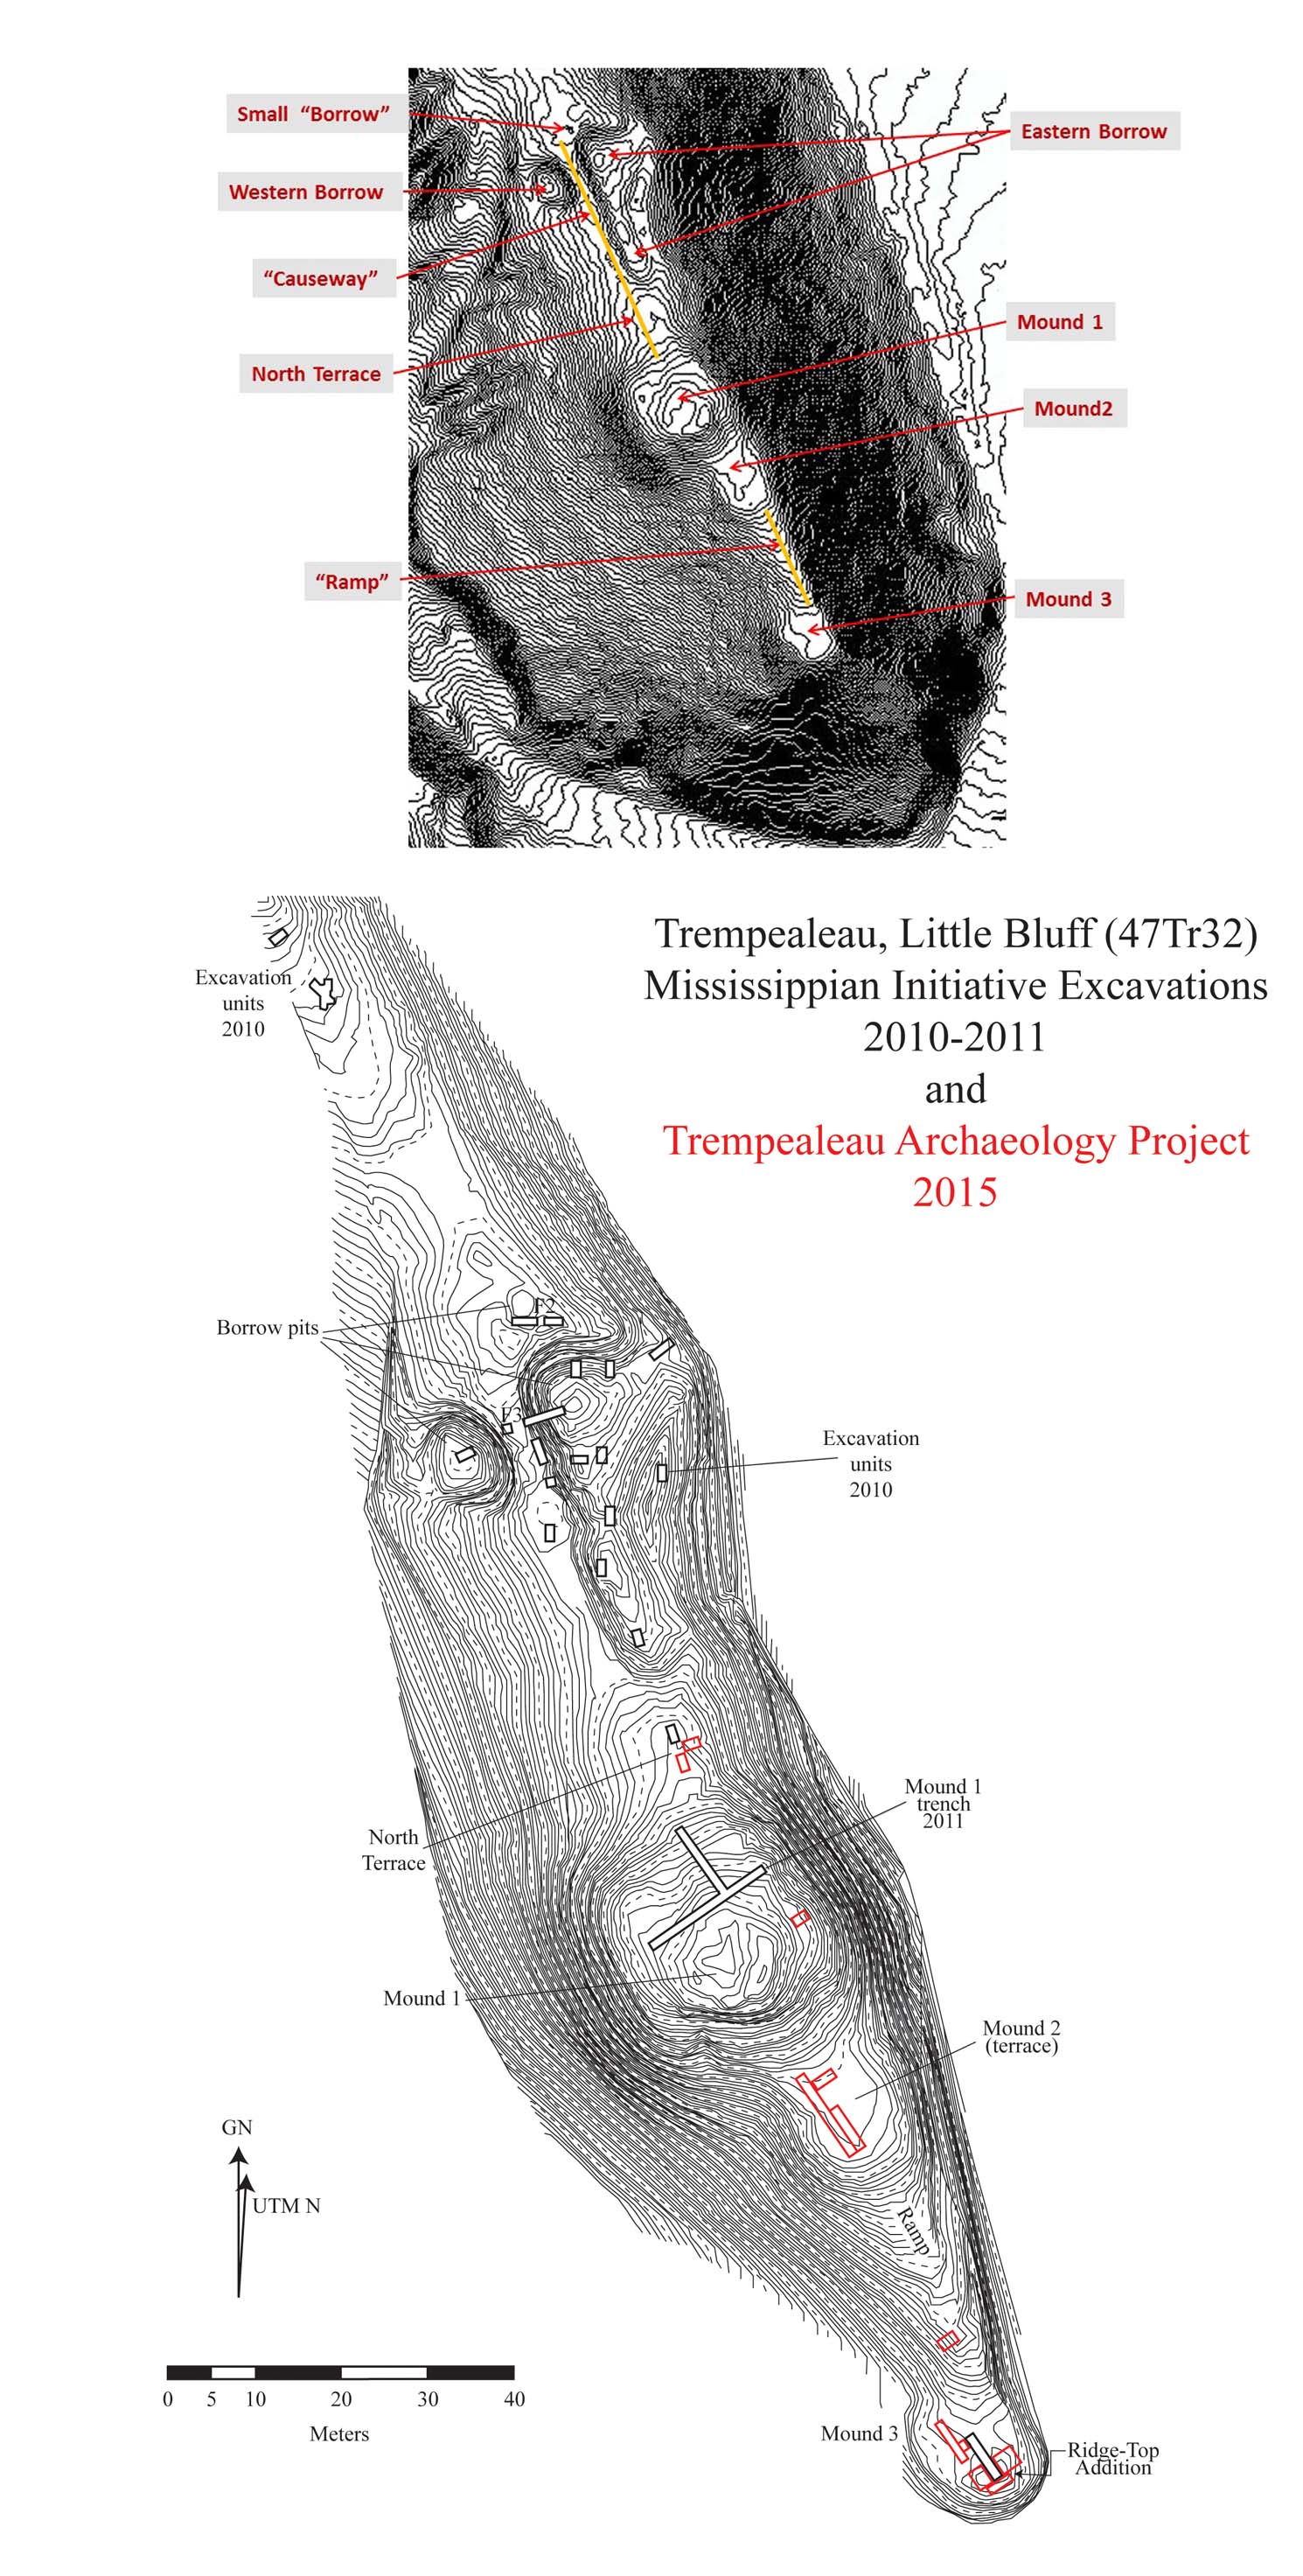 LB Lidar contour with surface features labeled for 2015 report